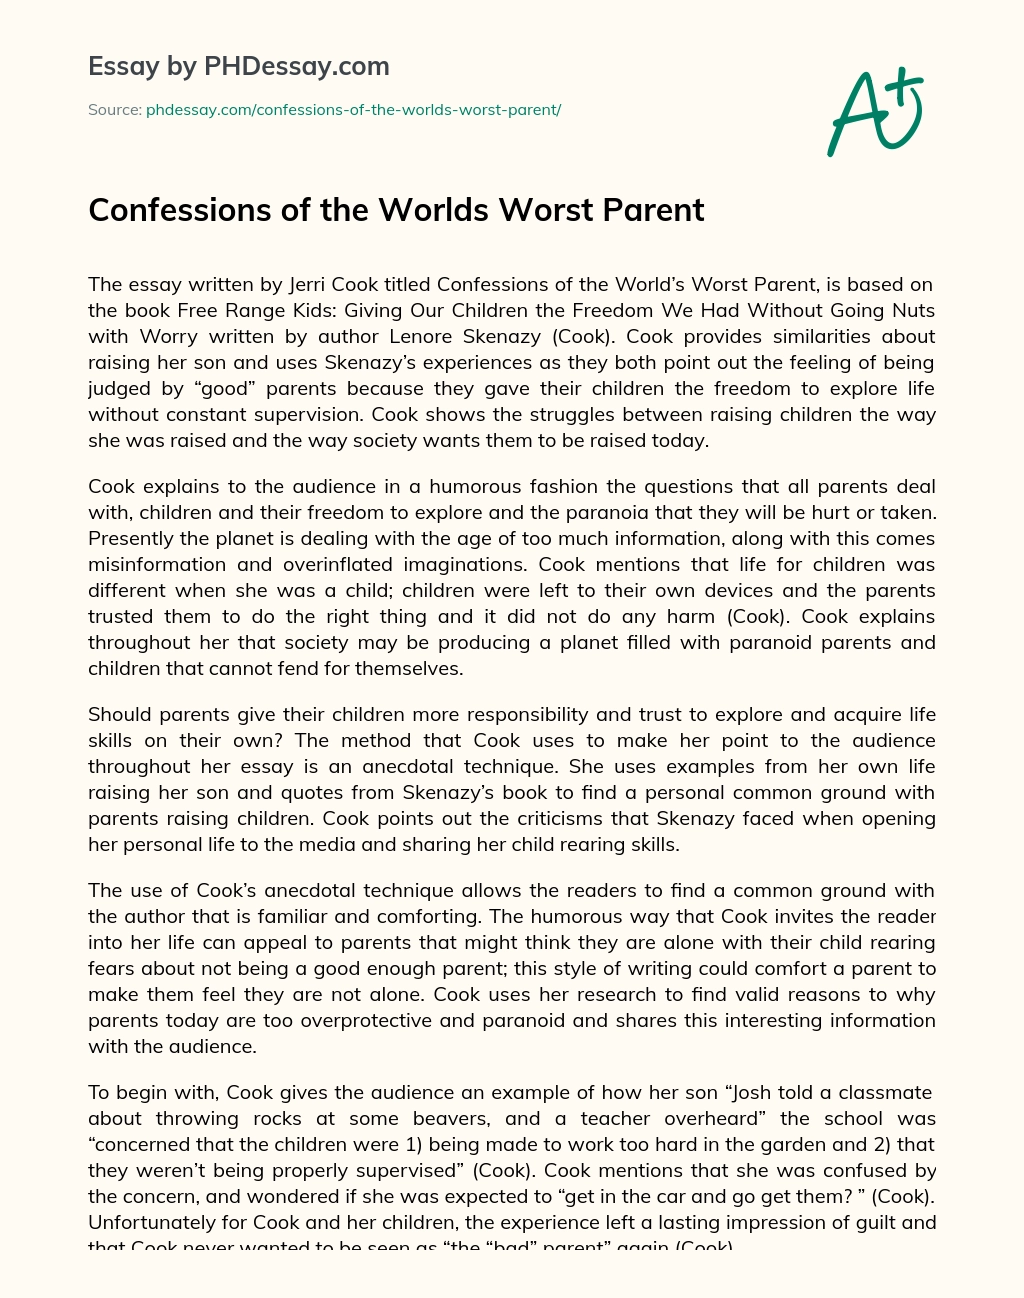 Confessions of the Worlds Worst Parent essay